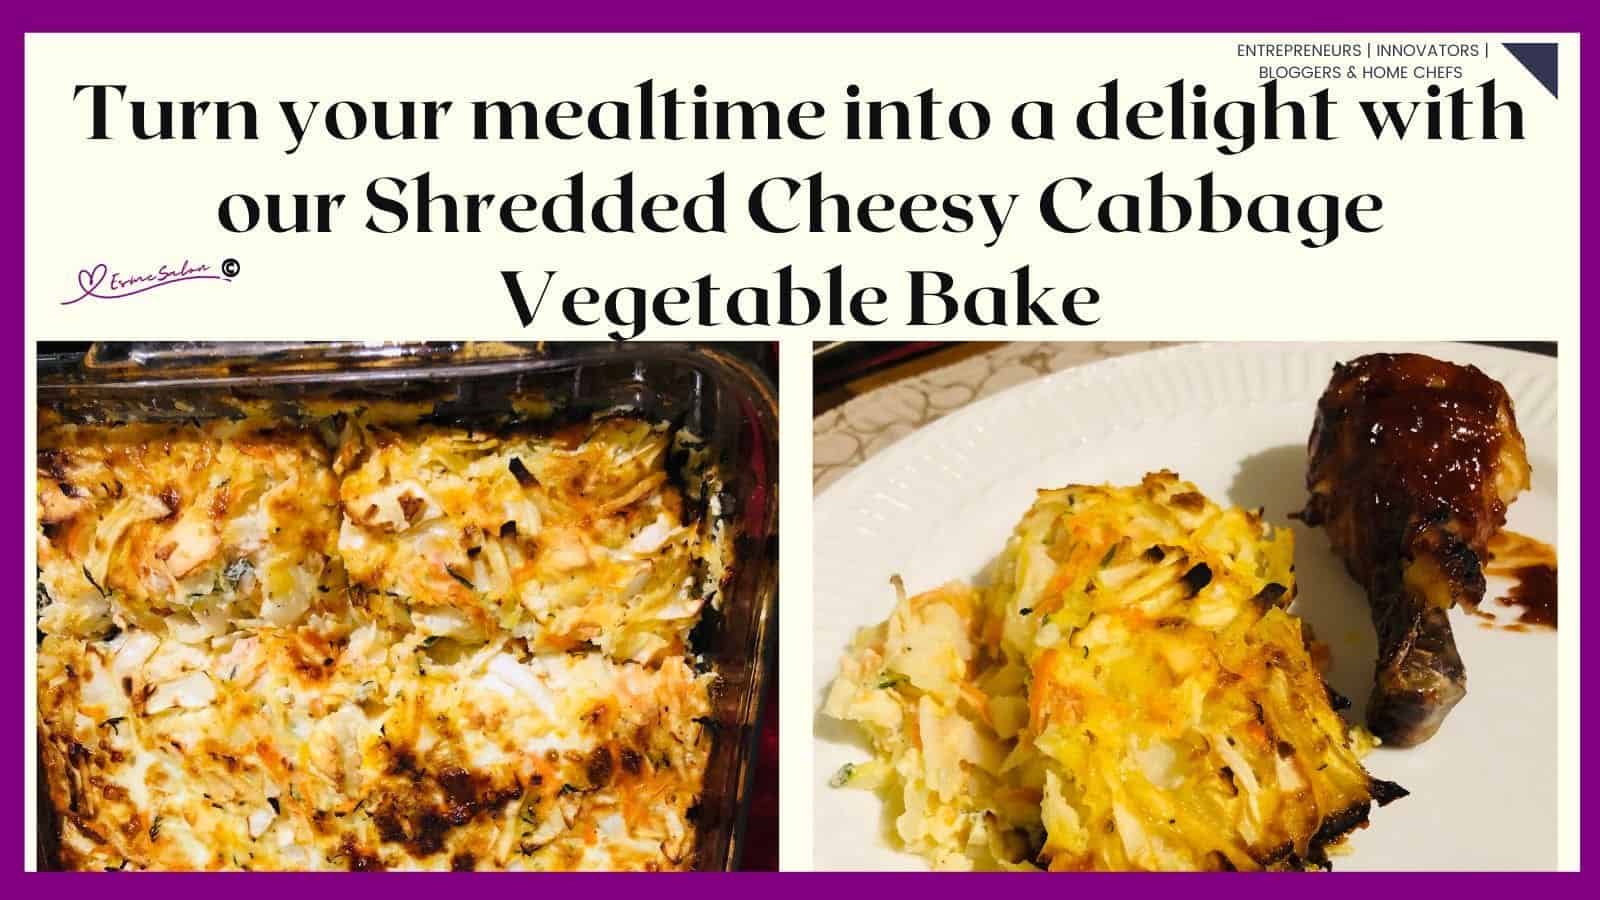 an image of a Shredded Cheesy Cabbage Vegetable Bake